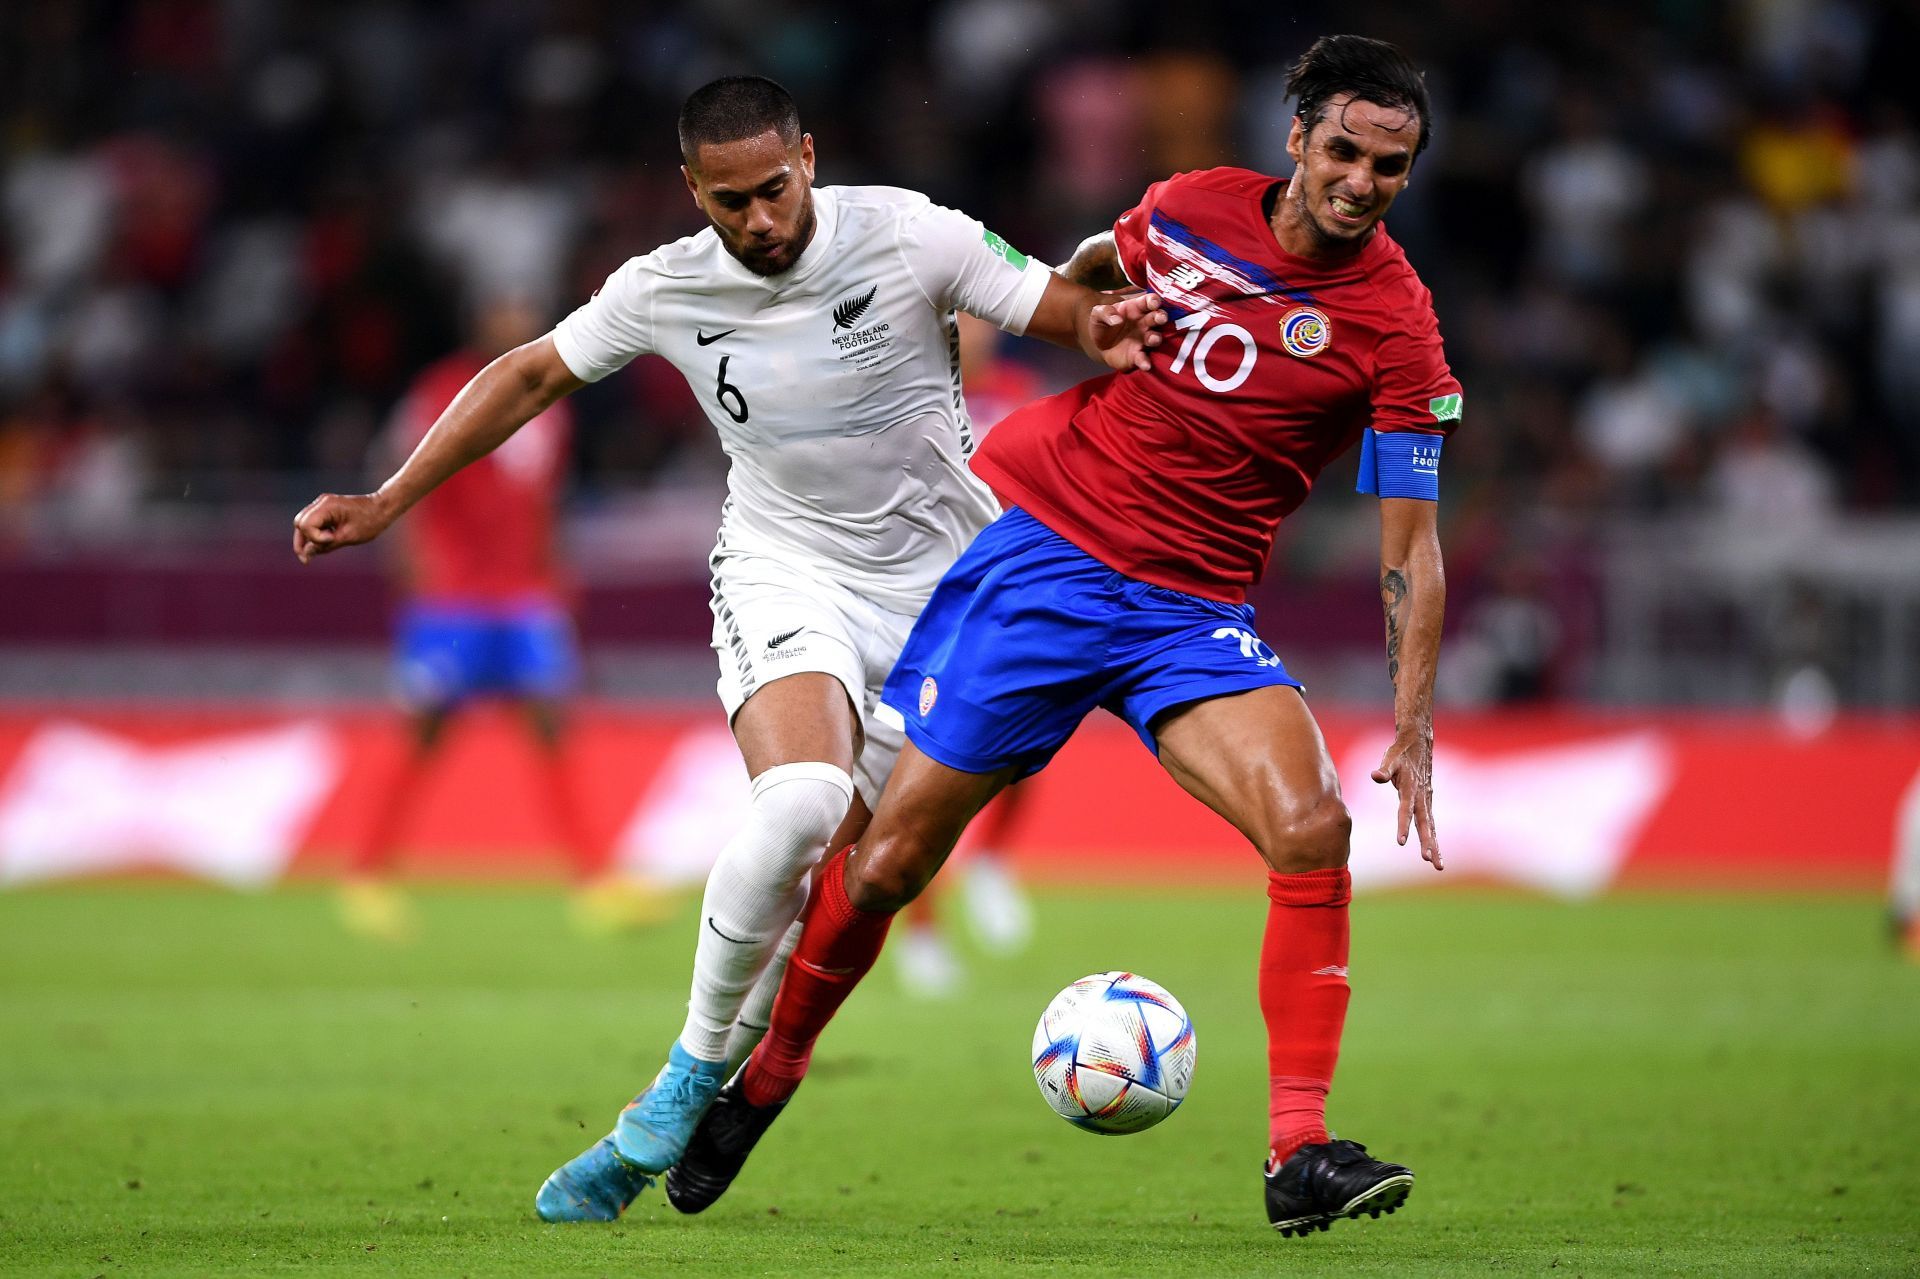 Costa Rica v New Zealand - 2022 FIFA World Cup Playoff